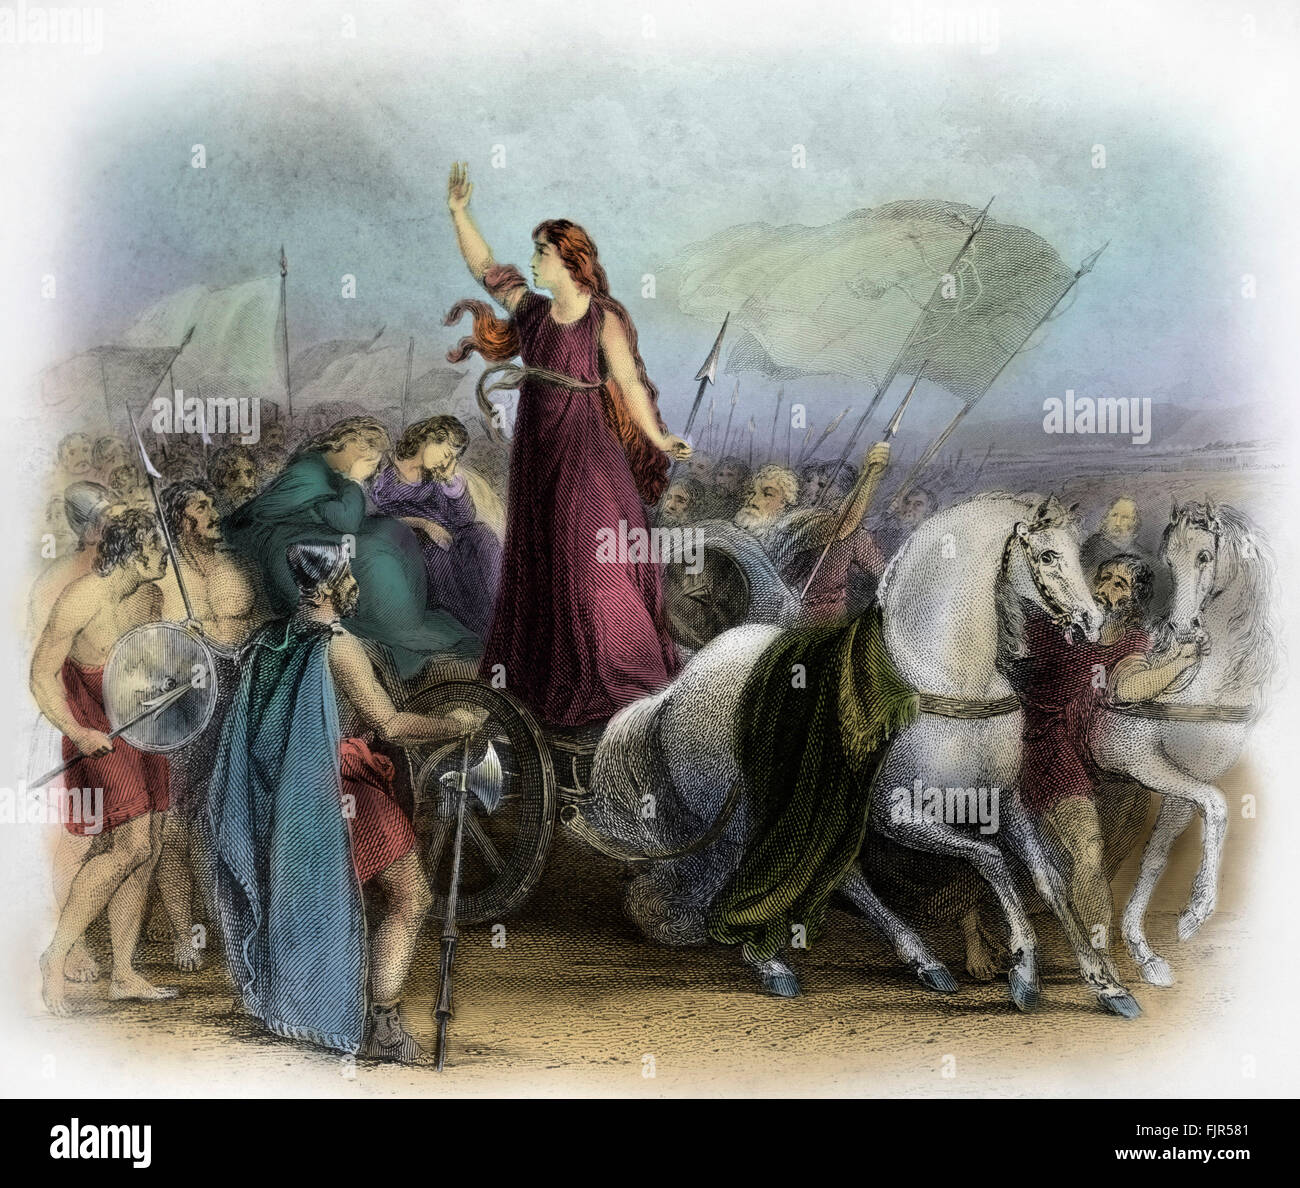 Boudica or Boadicea, Queen of the British Iceni tribe, a Celtic tribe who led an uprising against the occupying forces of the Roman Empire. Caption reads: 'Boadicea haranging the Britons.' Boudica died circa AD 60 or 61. Stock Photo